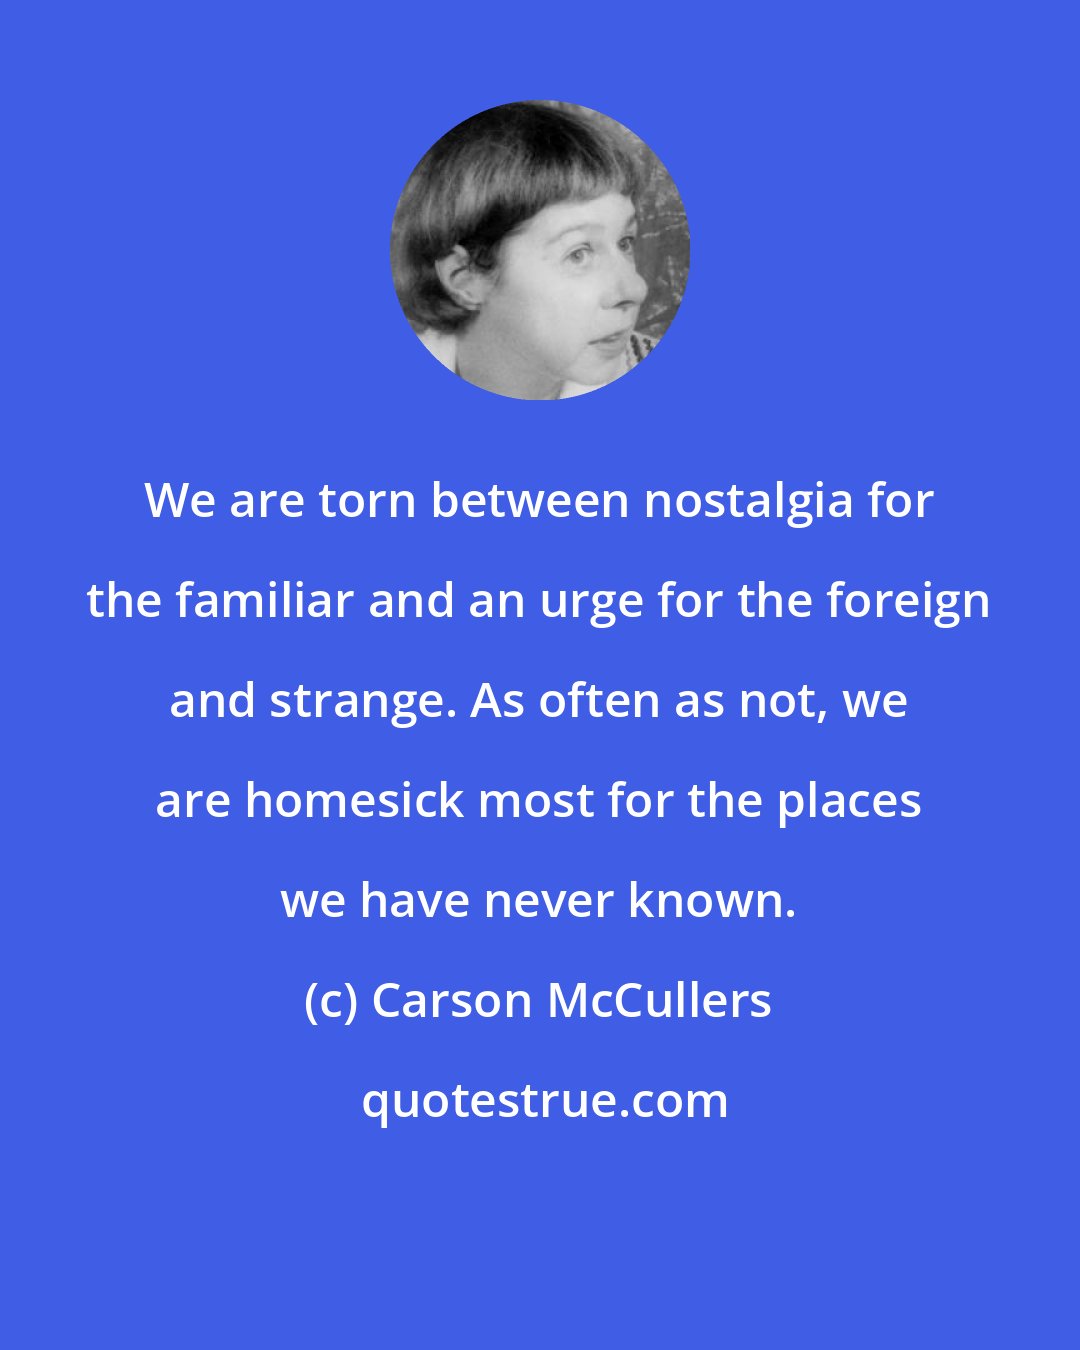 Carson McCullers: We are torn between nostalgia for the familiar and an urge for the foreign and strange. As often as not, we are homesick most for the places we have never known.